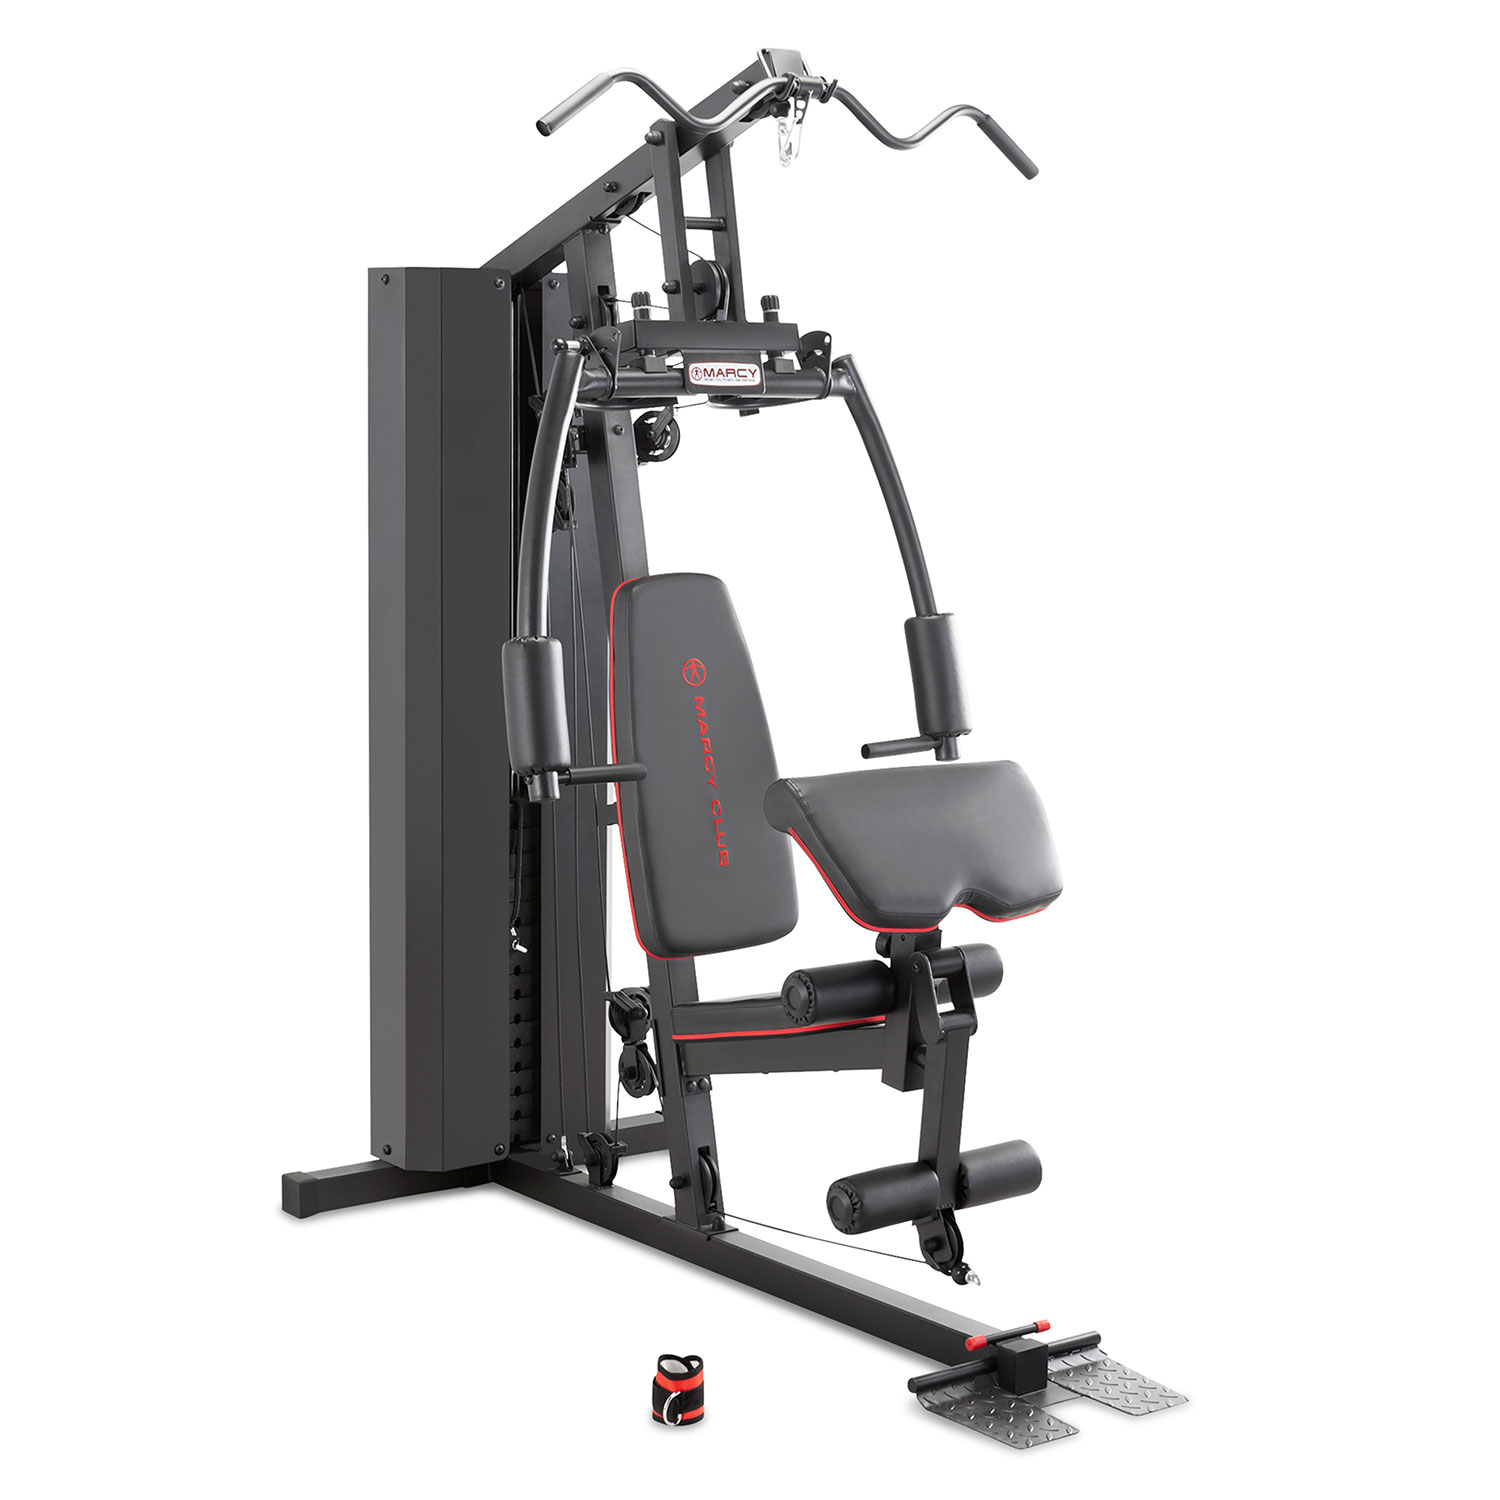  ULTRA FUEGO Multifunctional Home Gym Equipment Workout